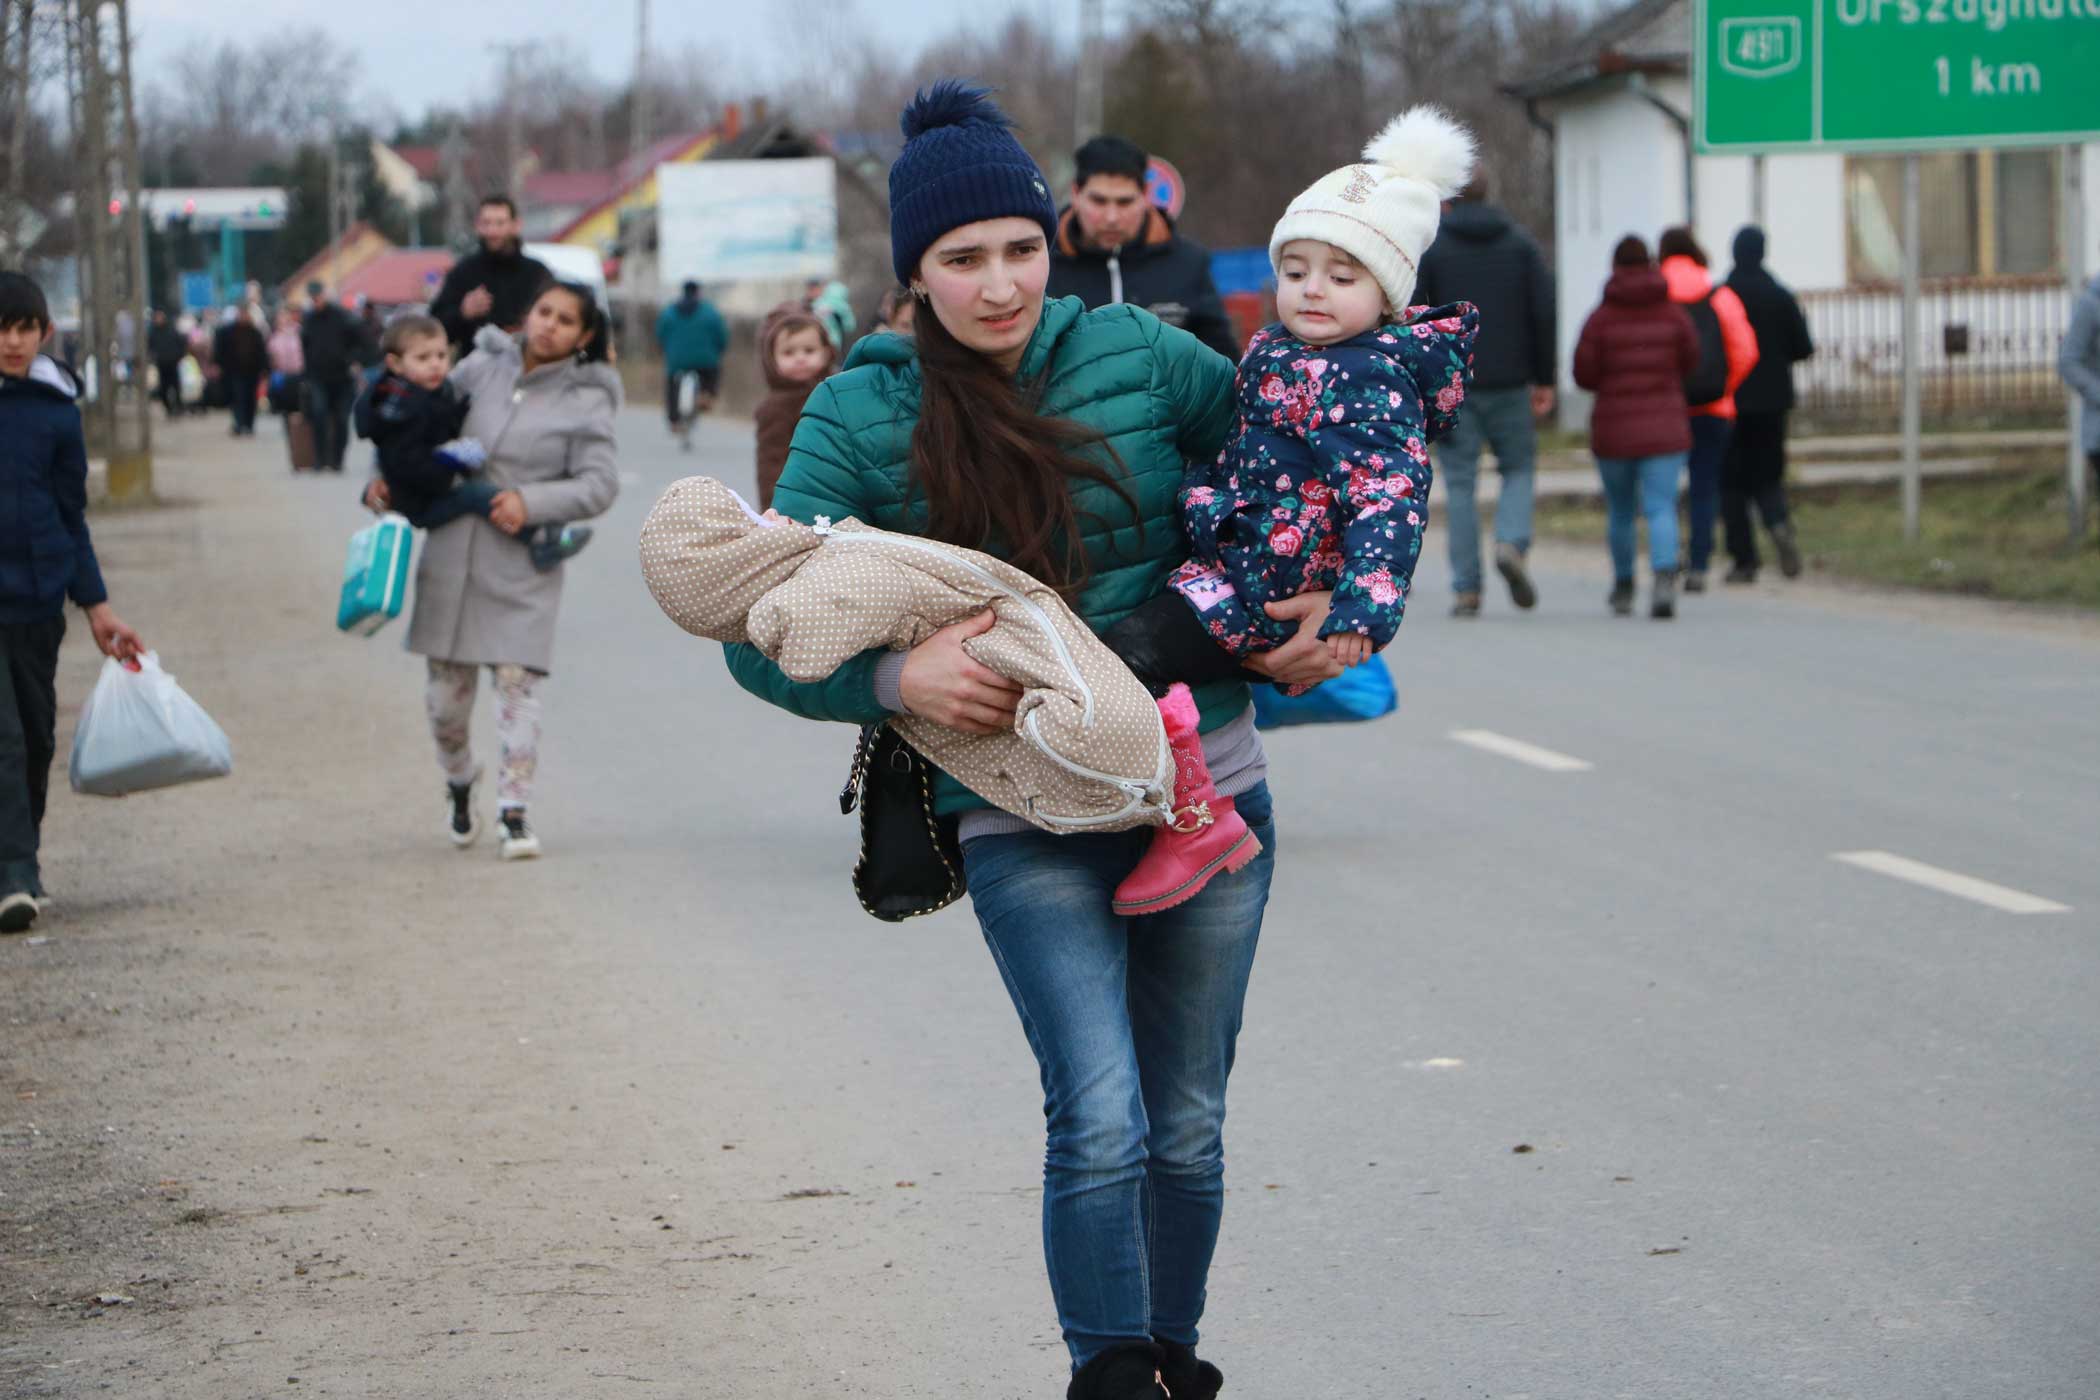 Hungary. Families from Ukraine seek safety in Hungary